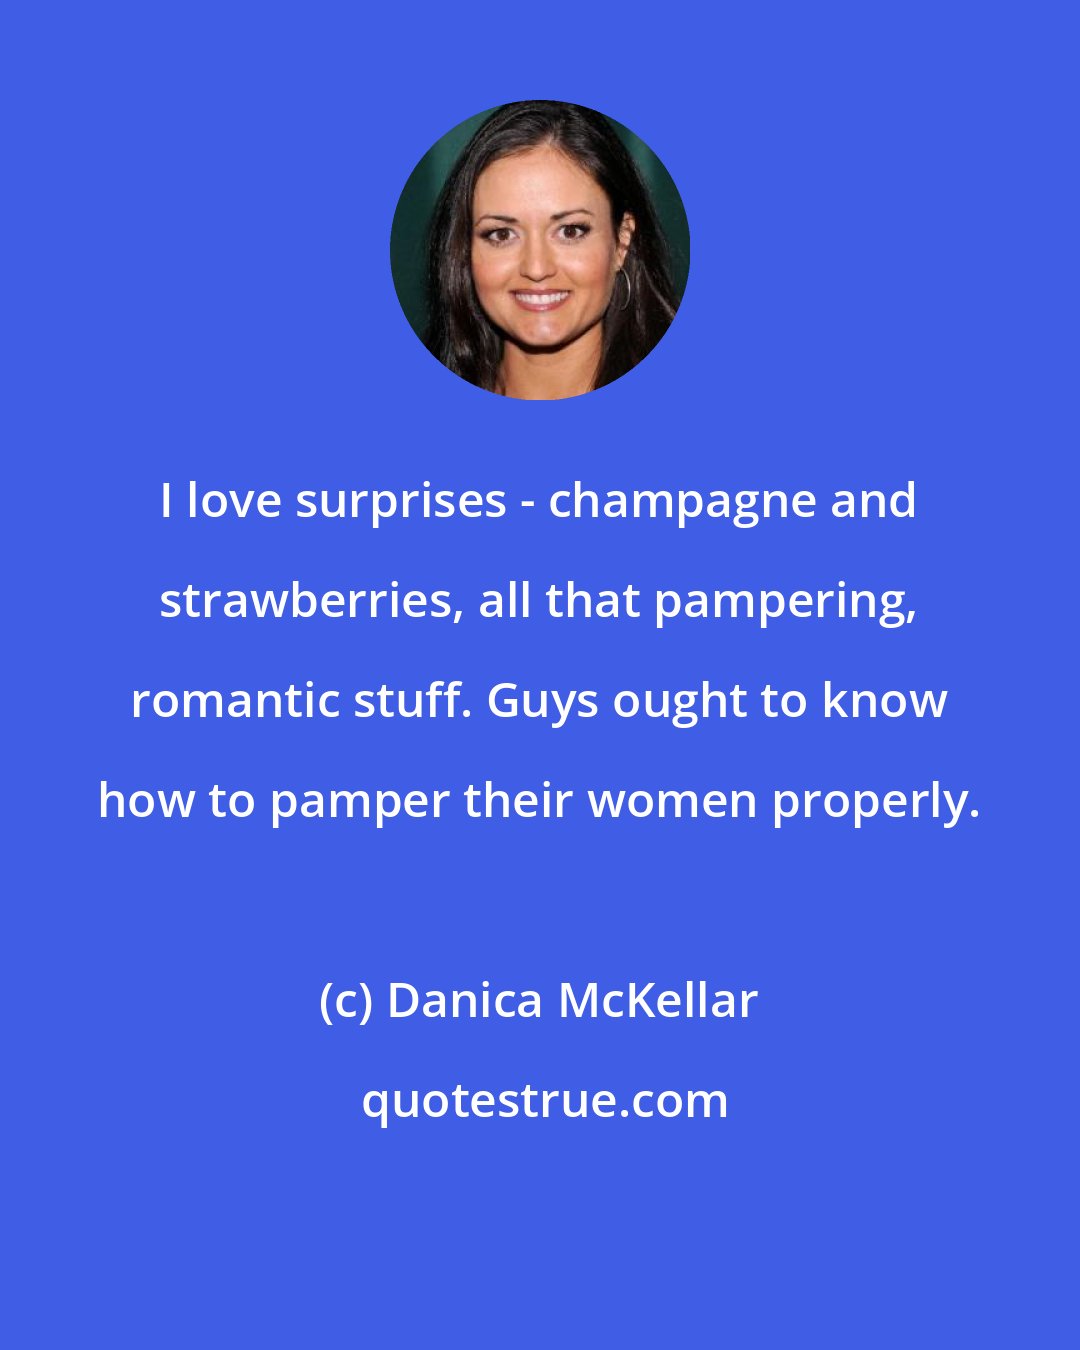 Danica McKellar: I love surprises - champagne and strawberries, all that pampering, romantic stuff. Guys ought to know how to pamper their women properly.